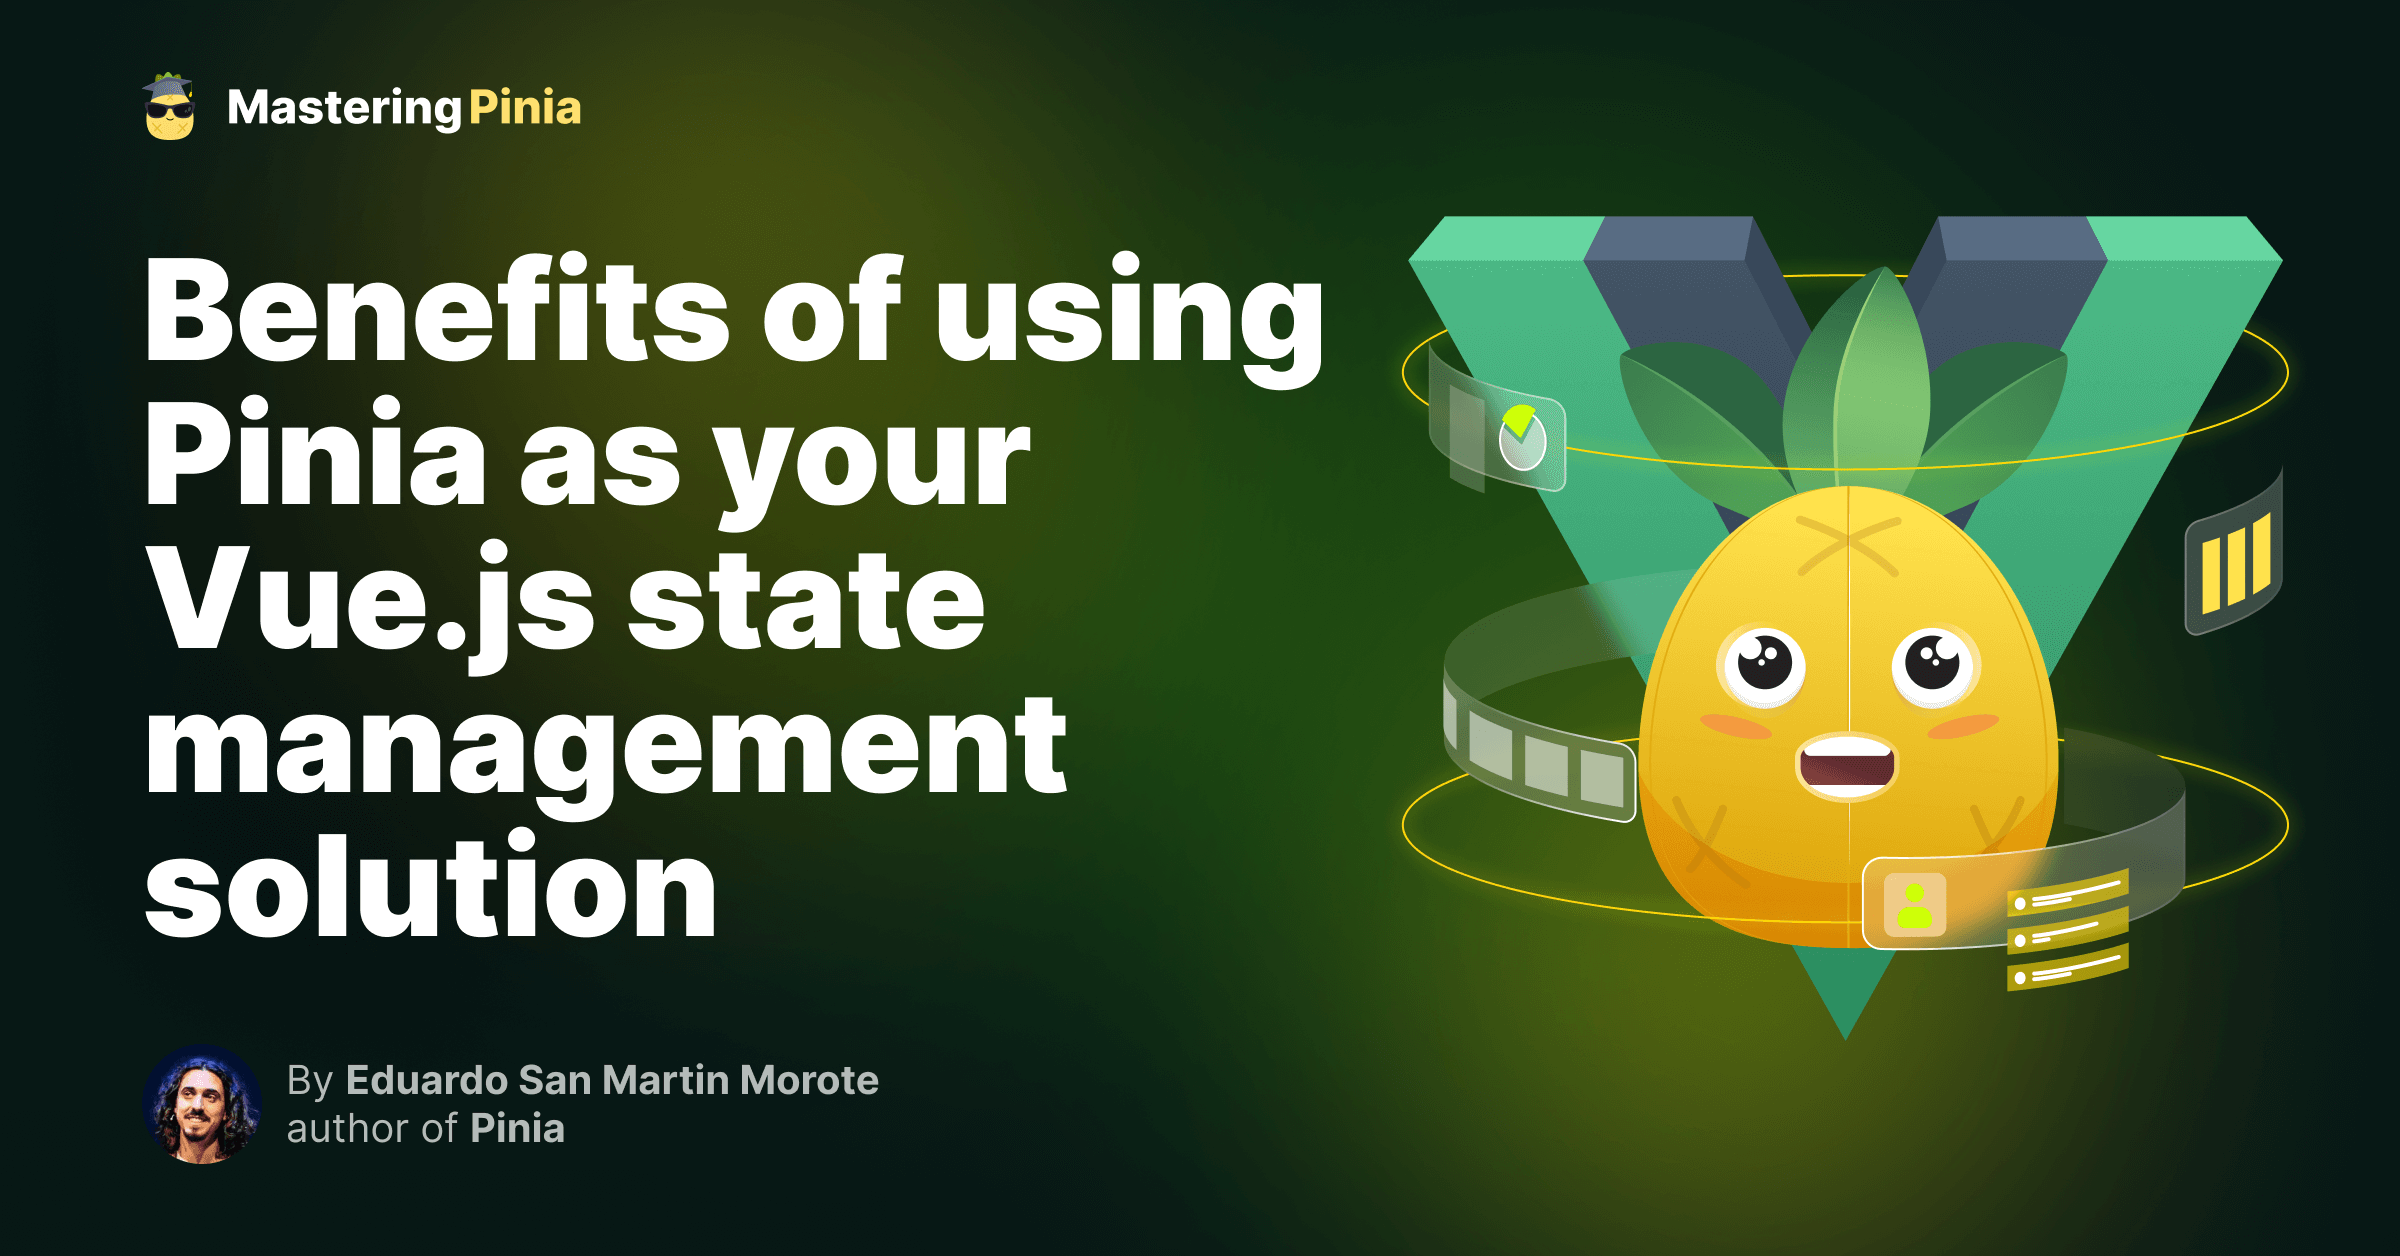 Benefits of using Pinia as your Vue.js state management solution